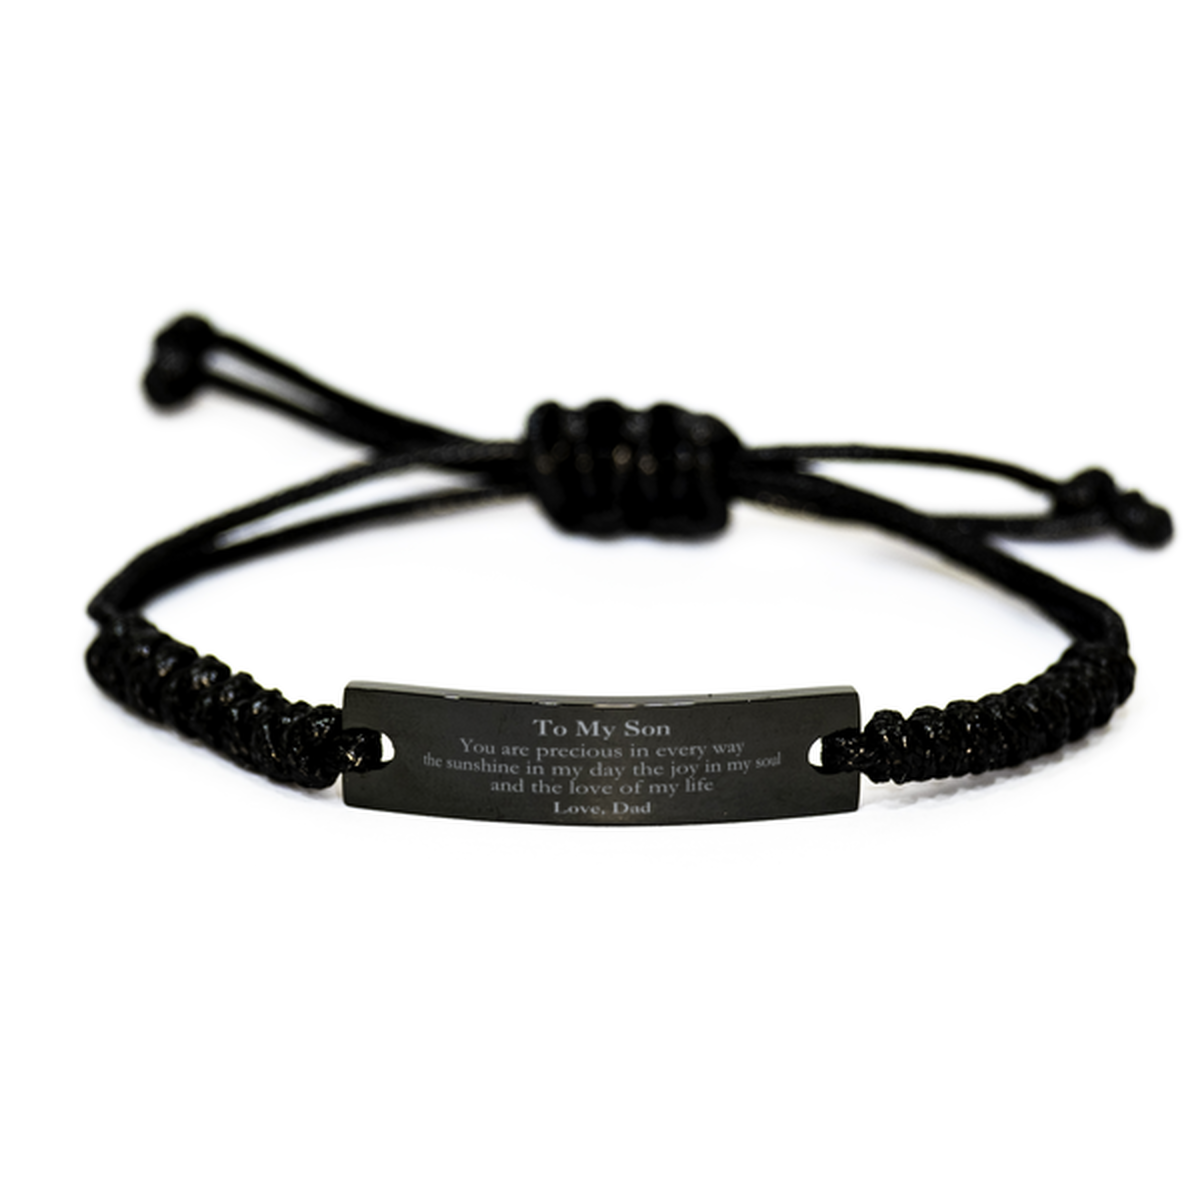 Graduation Gifts for Son Black Rope Bracelet Present from Dad, Christmas Son Birthday Gifts Son You are precious in every way the sunshine in my day. Love, Dad